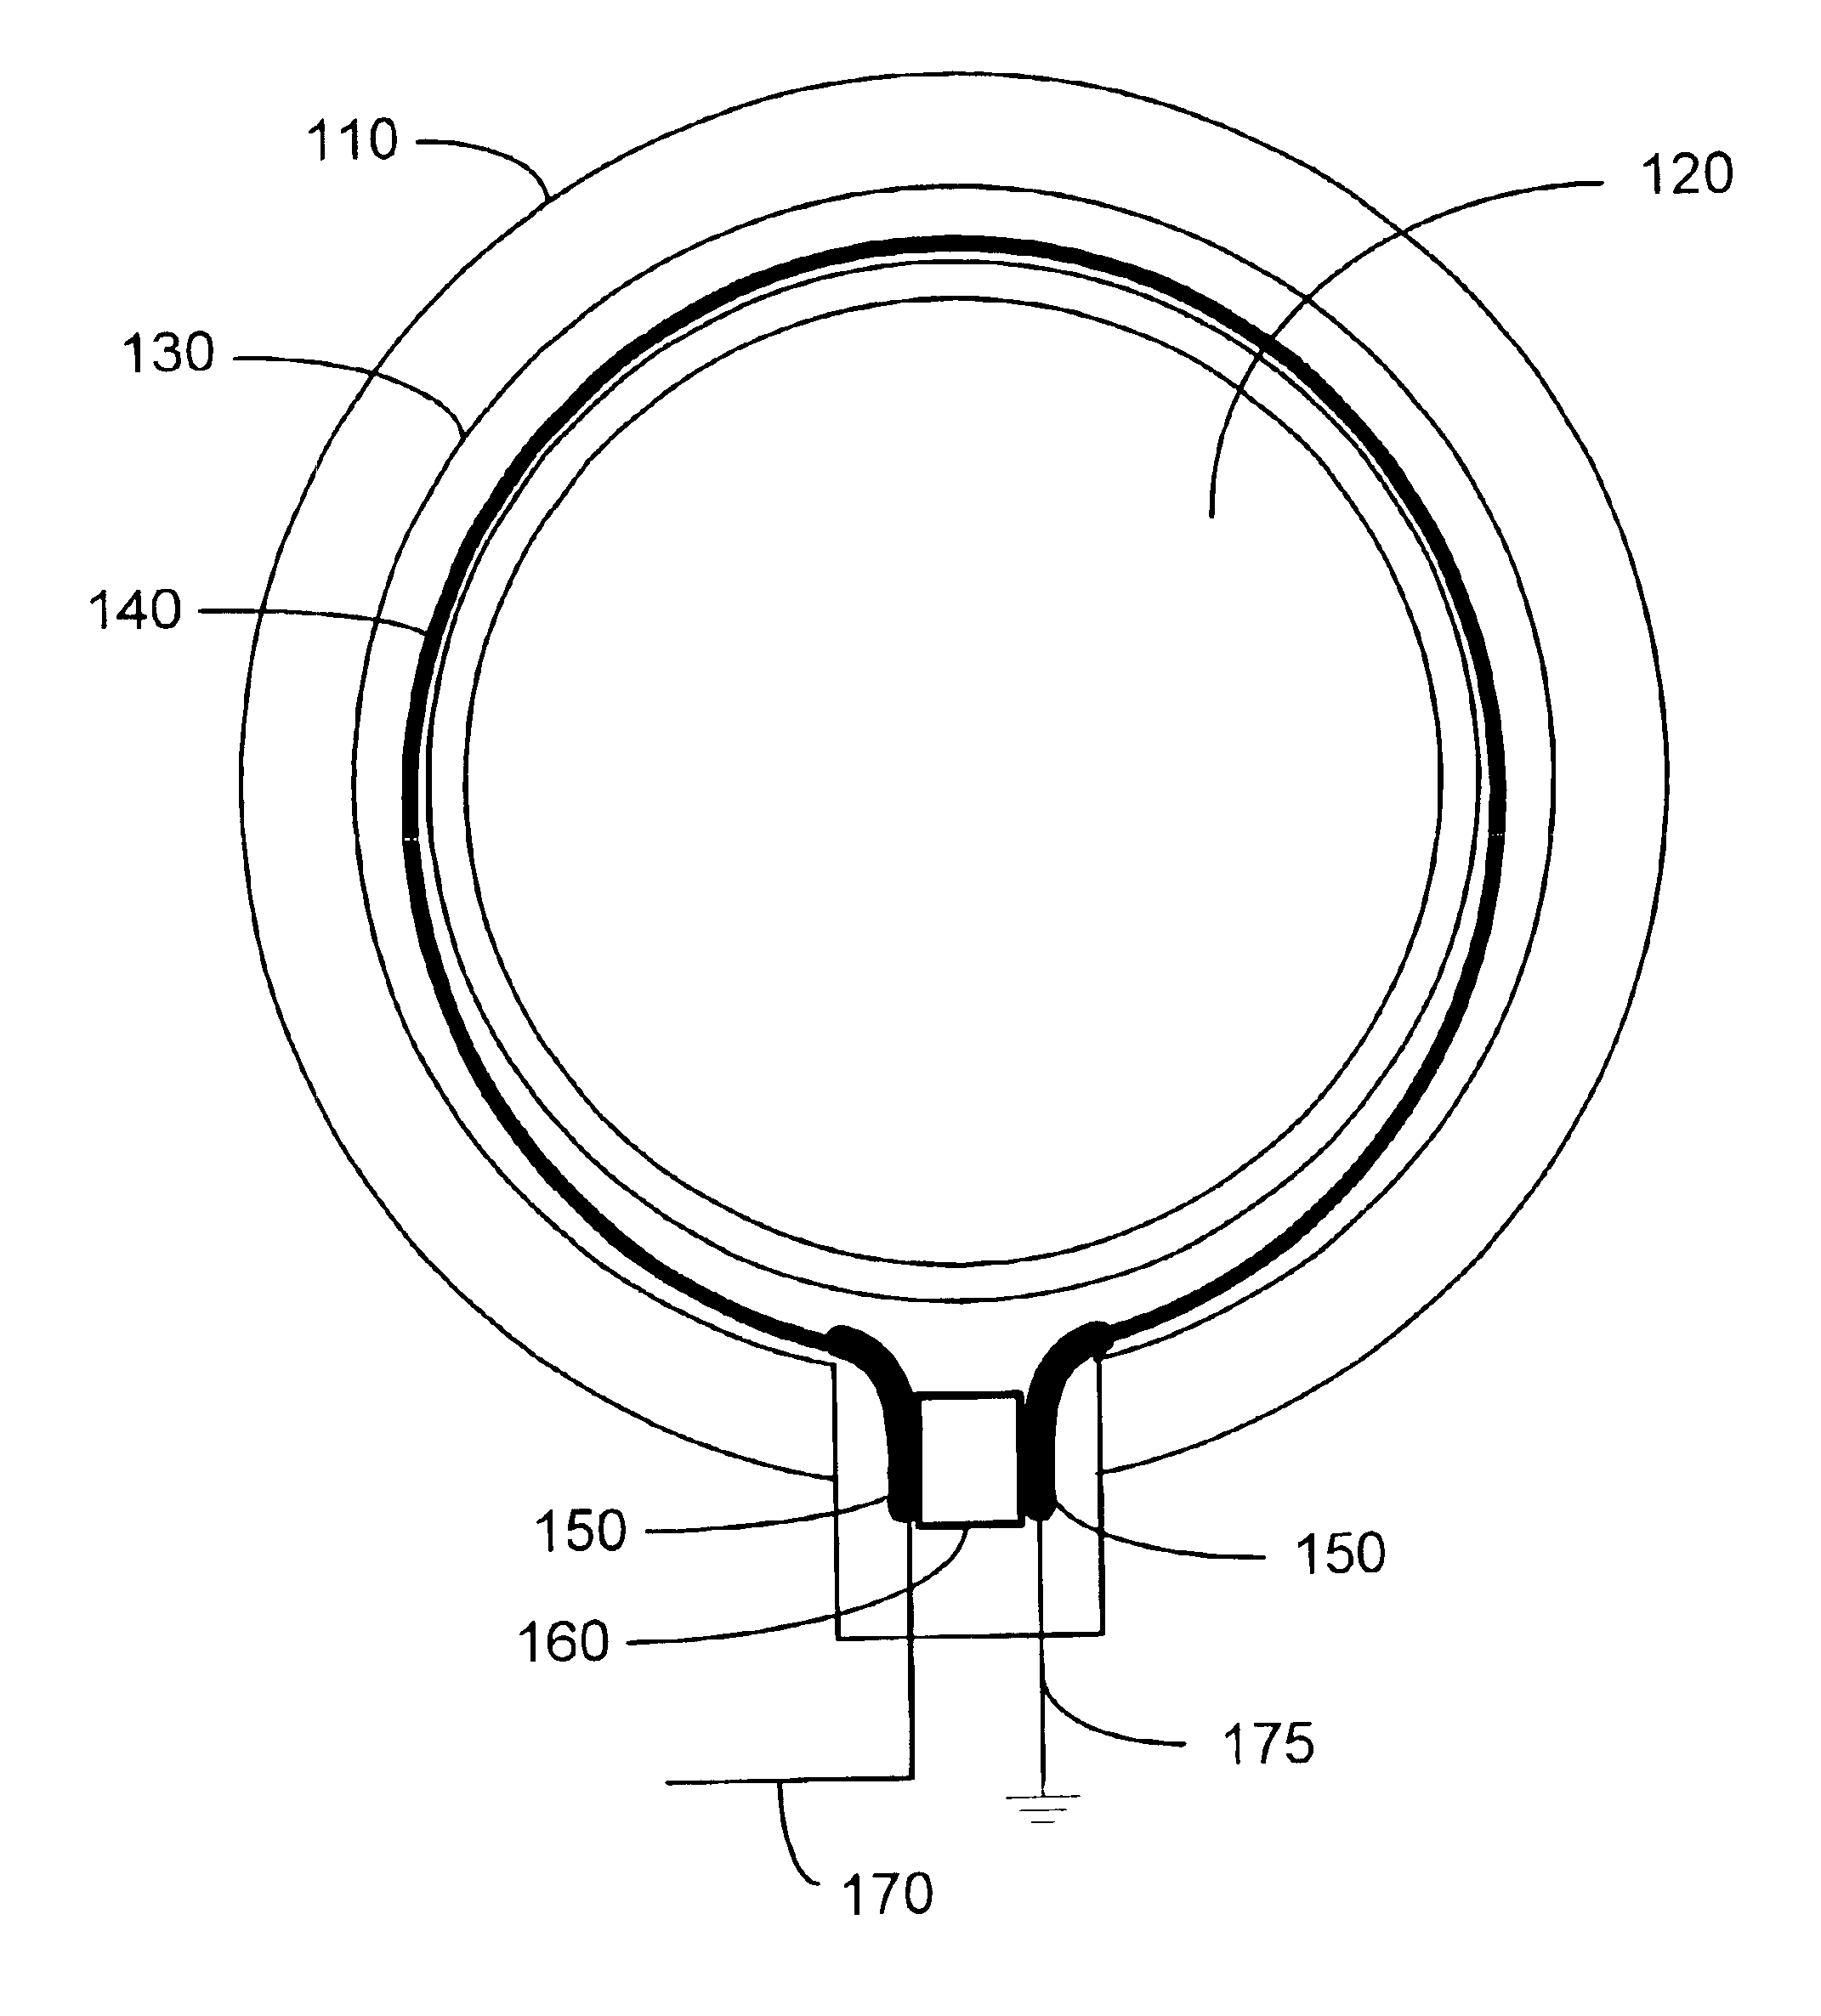 High temperature superconductor tape RF coil for magnetic resonance imaging